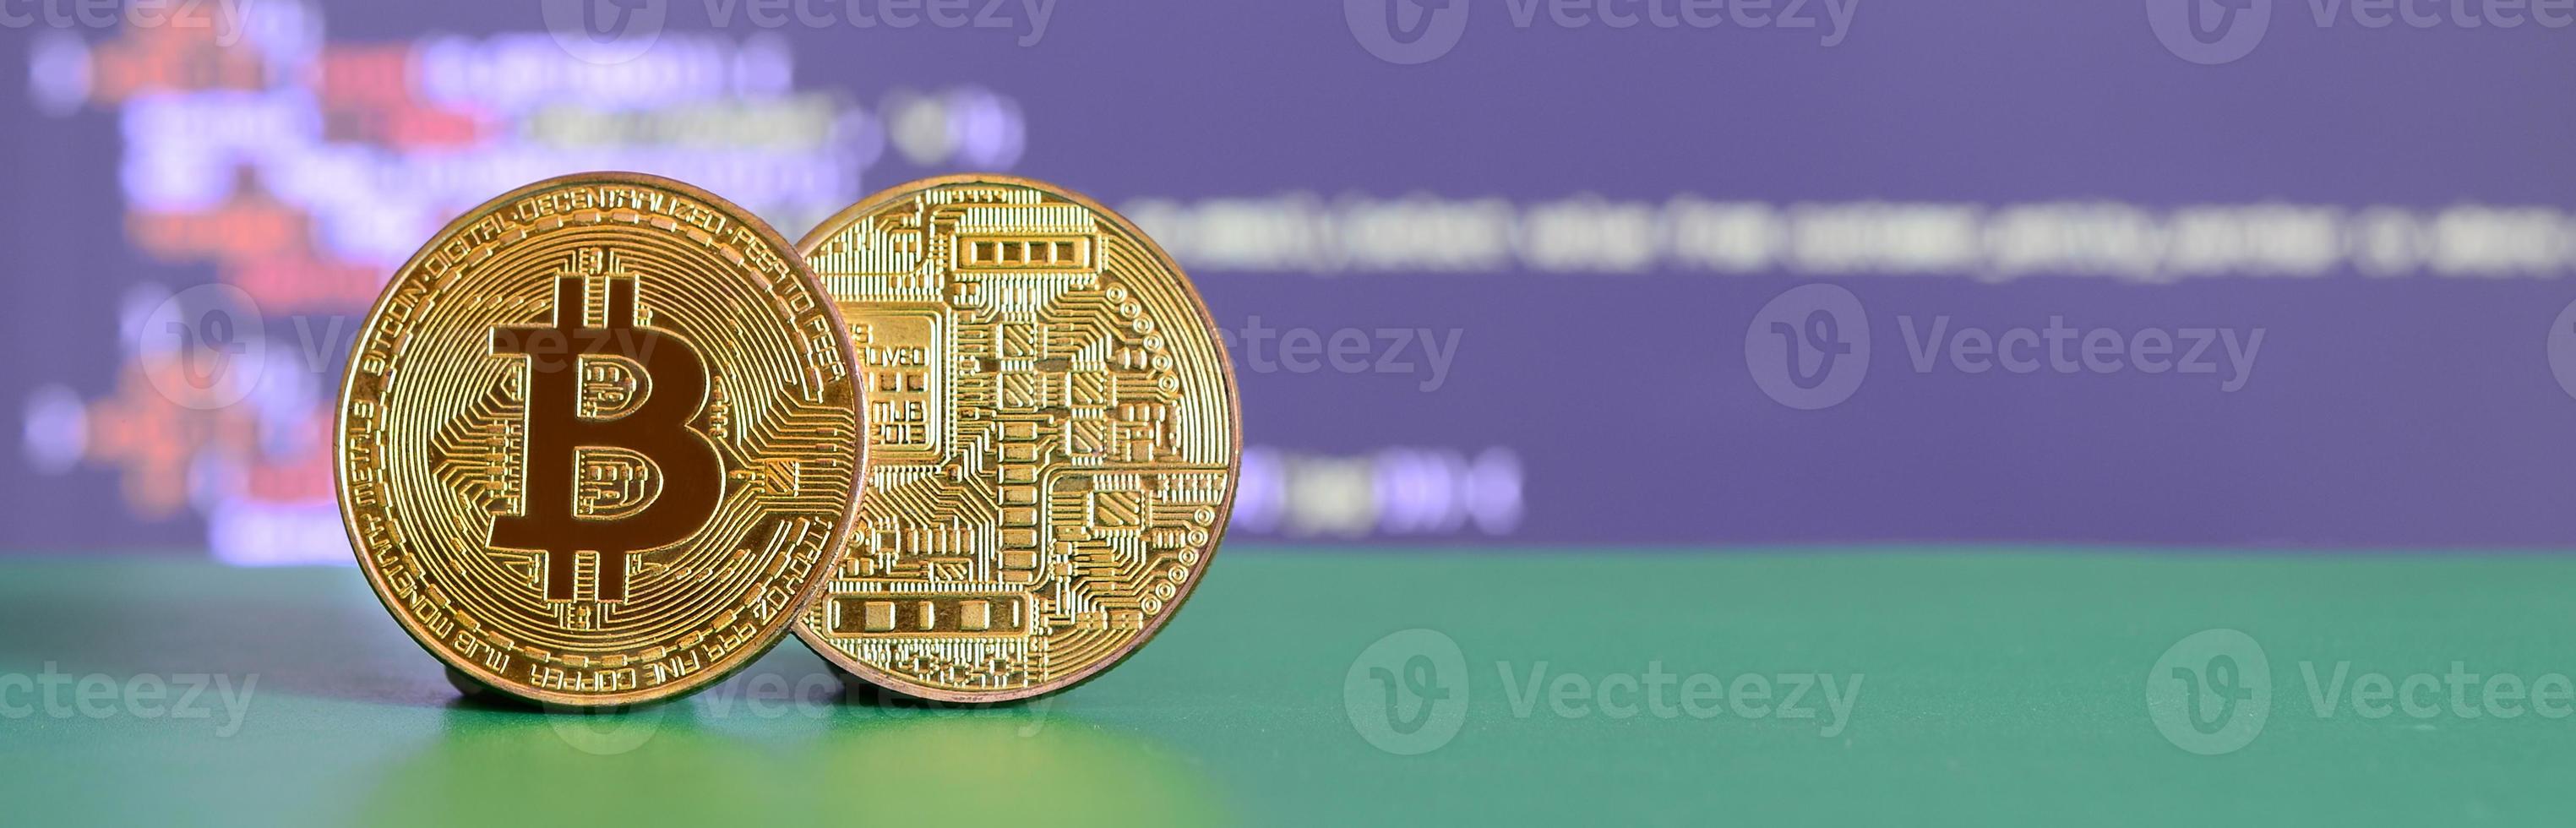 Two gold bitcoins lie on the green surface on the background of the display, which shows the process of mining the crypto currency photo